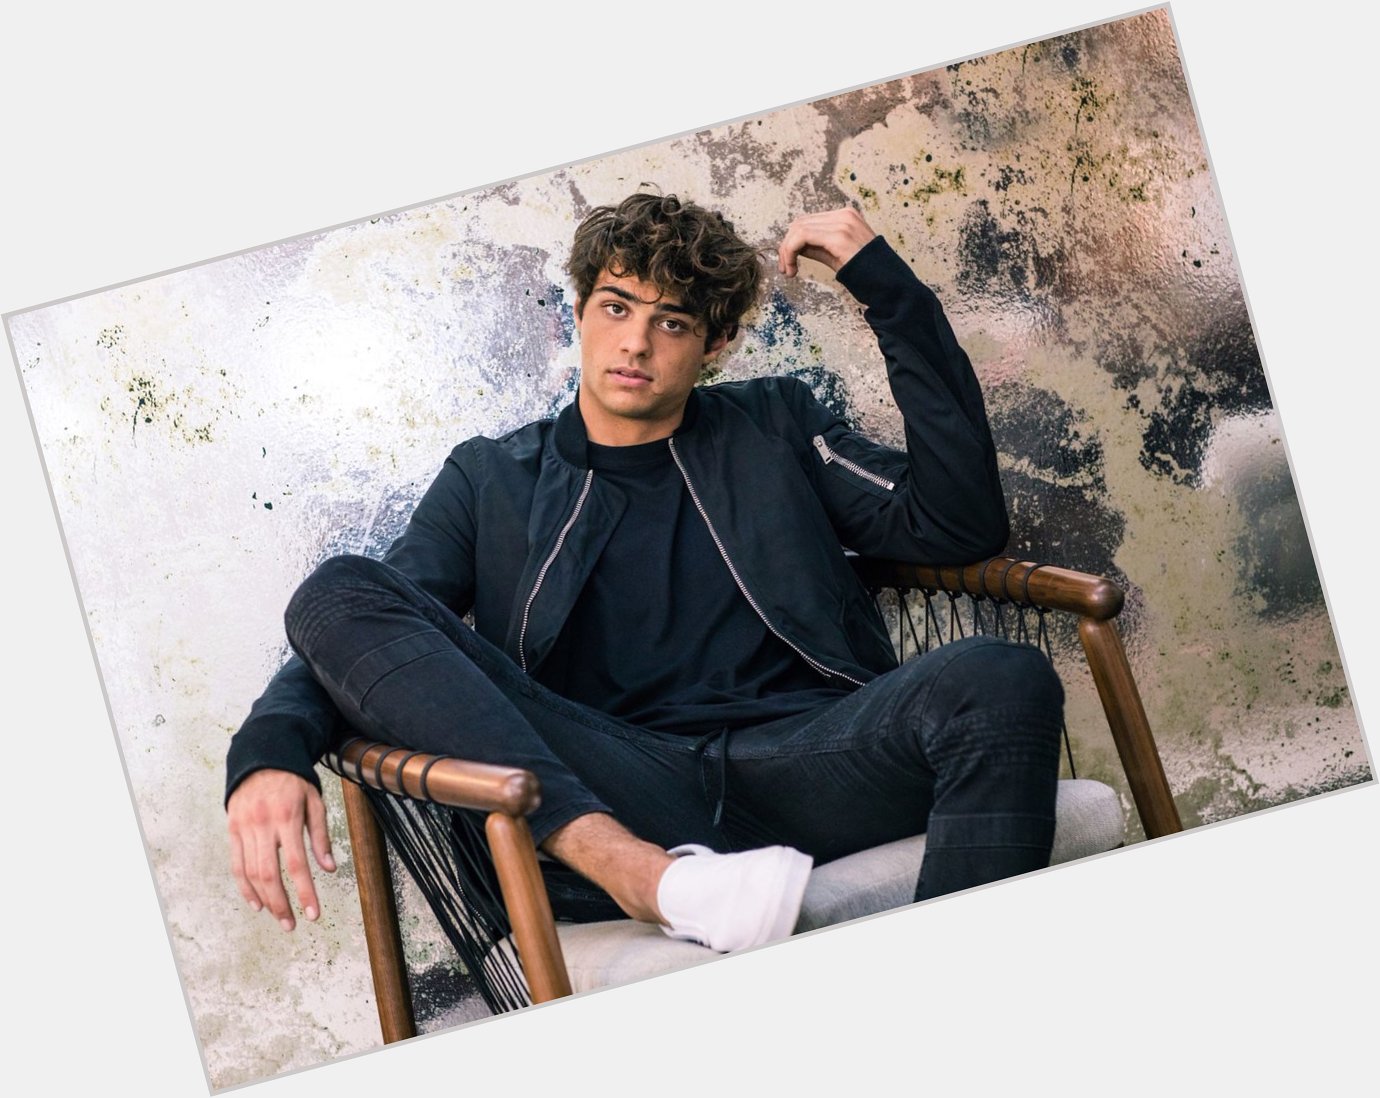 Happy Birthday to our Atom Smasher, Noah Centineo ( The Black Adam star turns 25 today! 